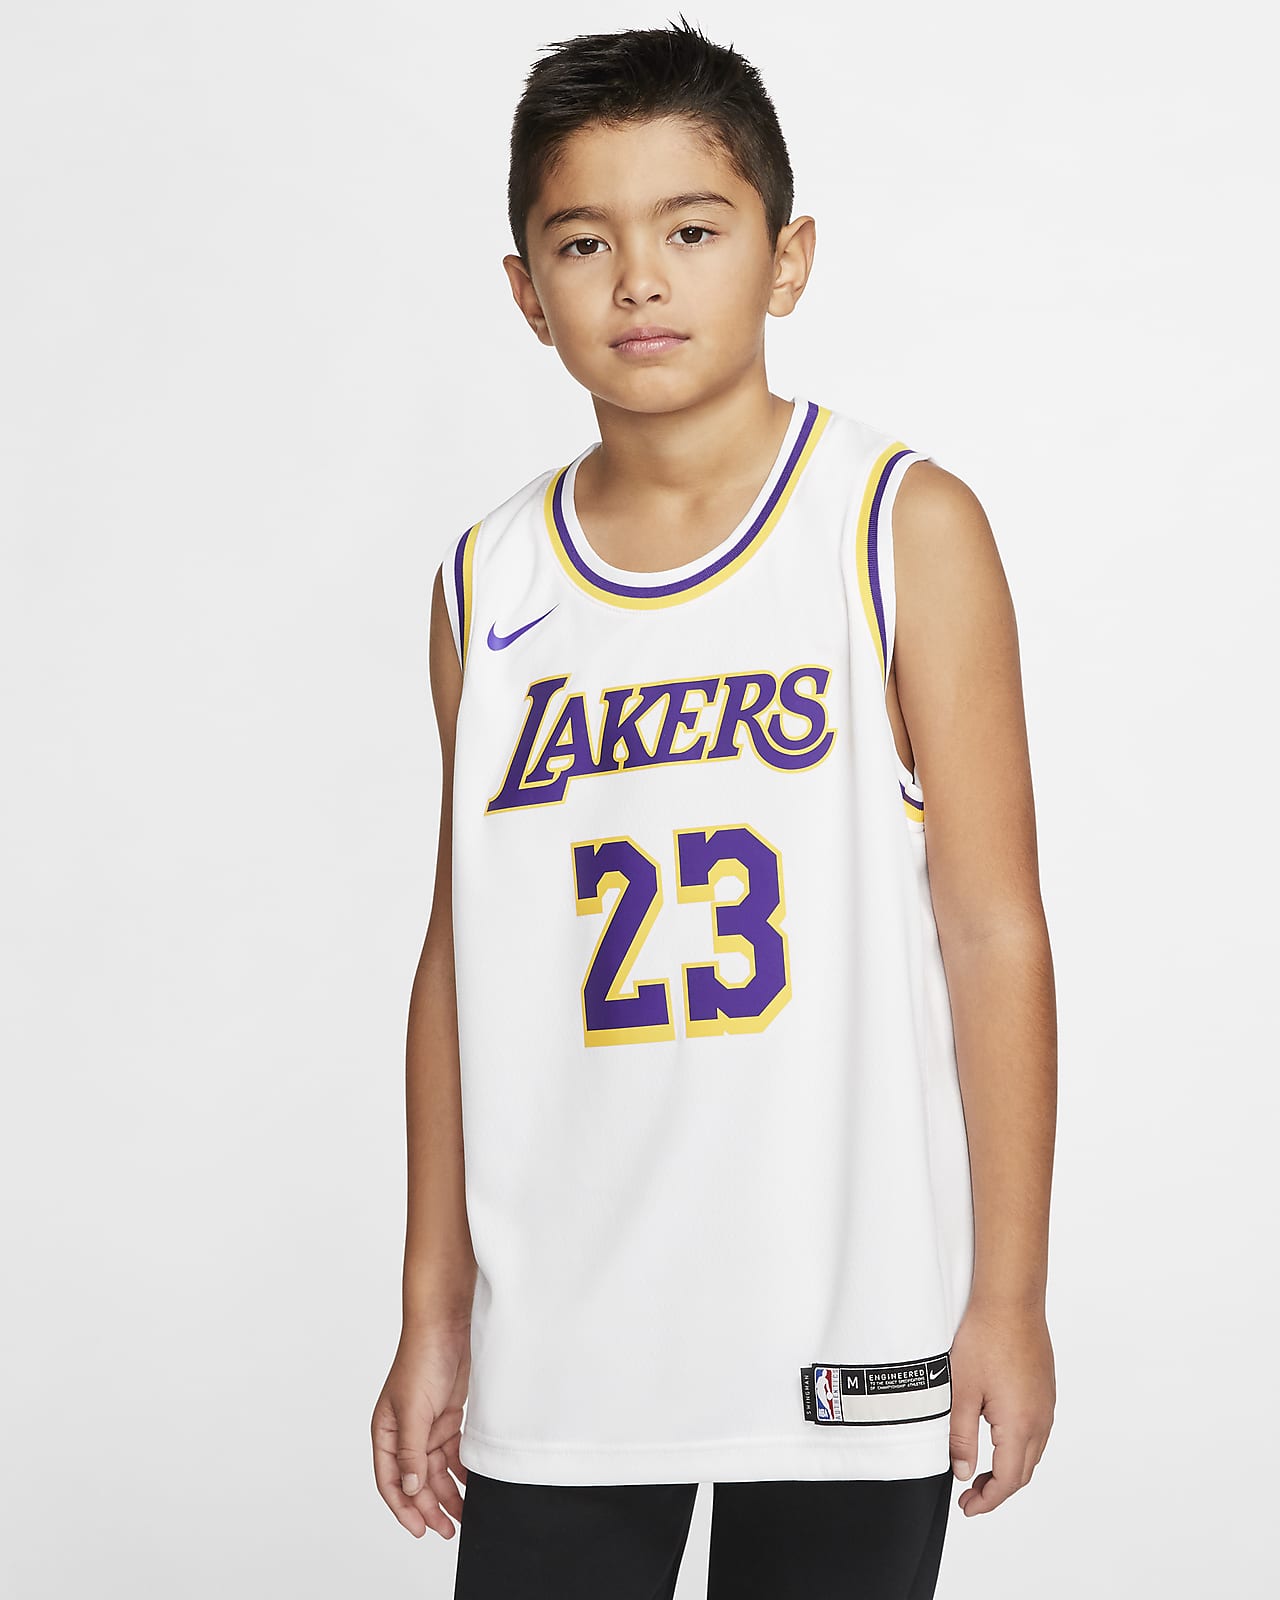 Lakers Jersey Kids Clearance Sale, UP TO 56% OFF